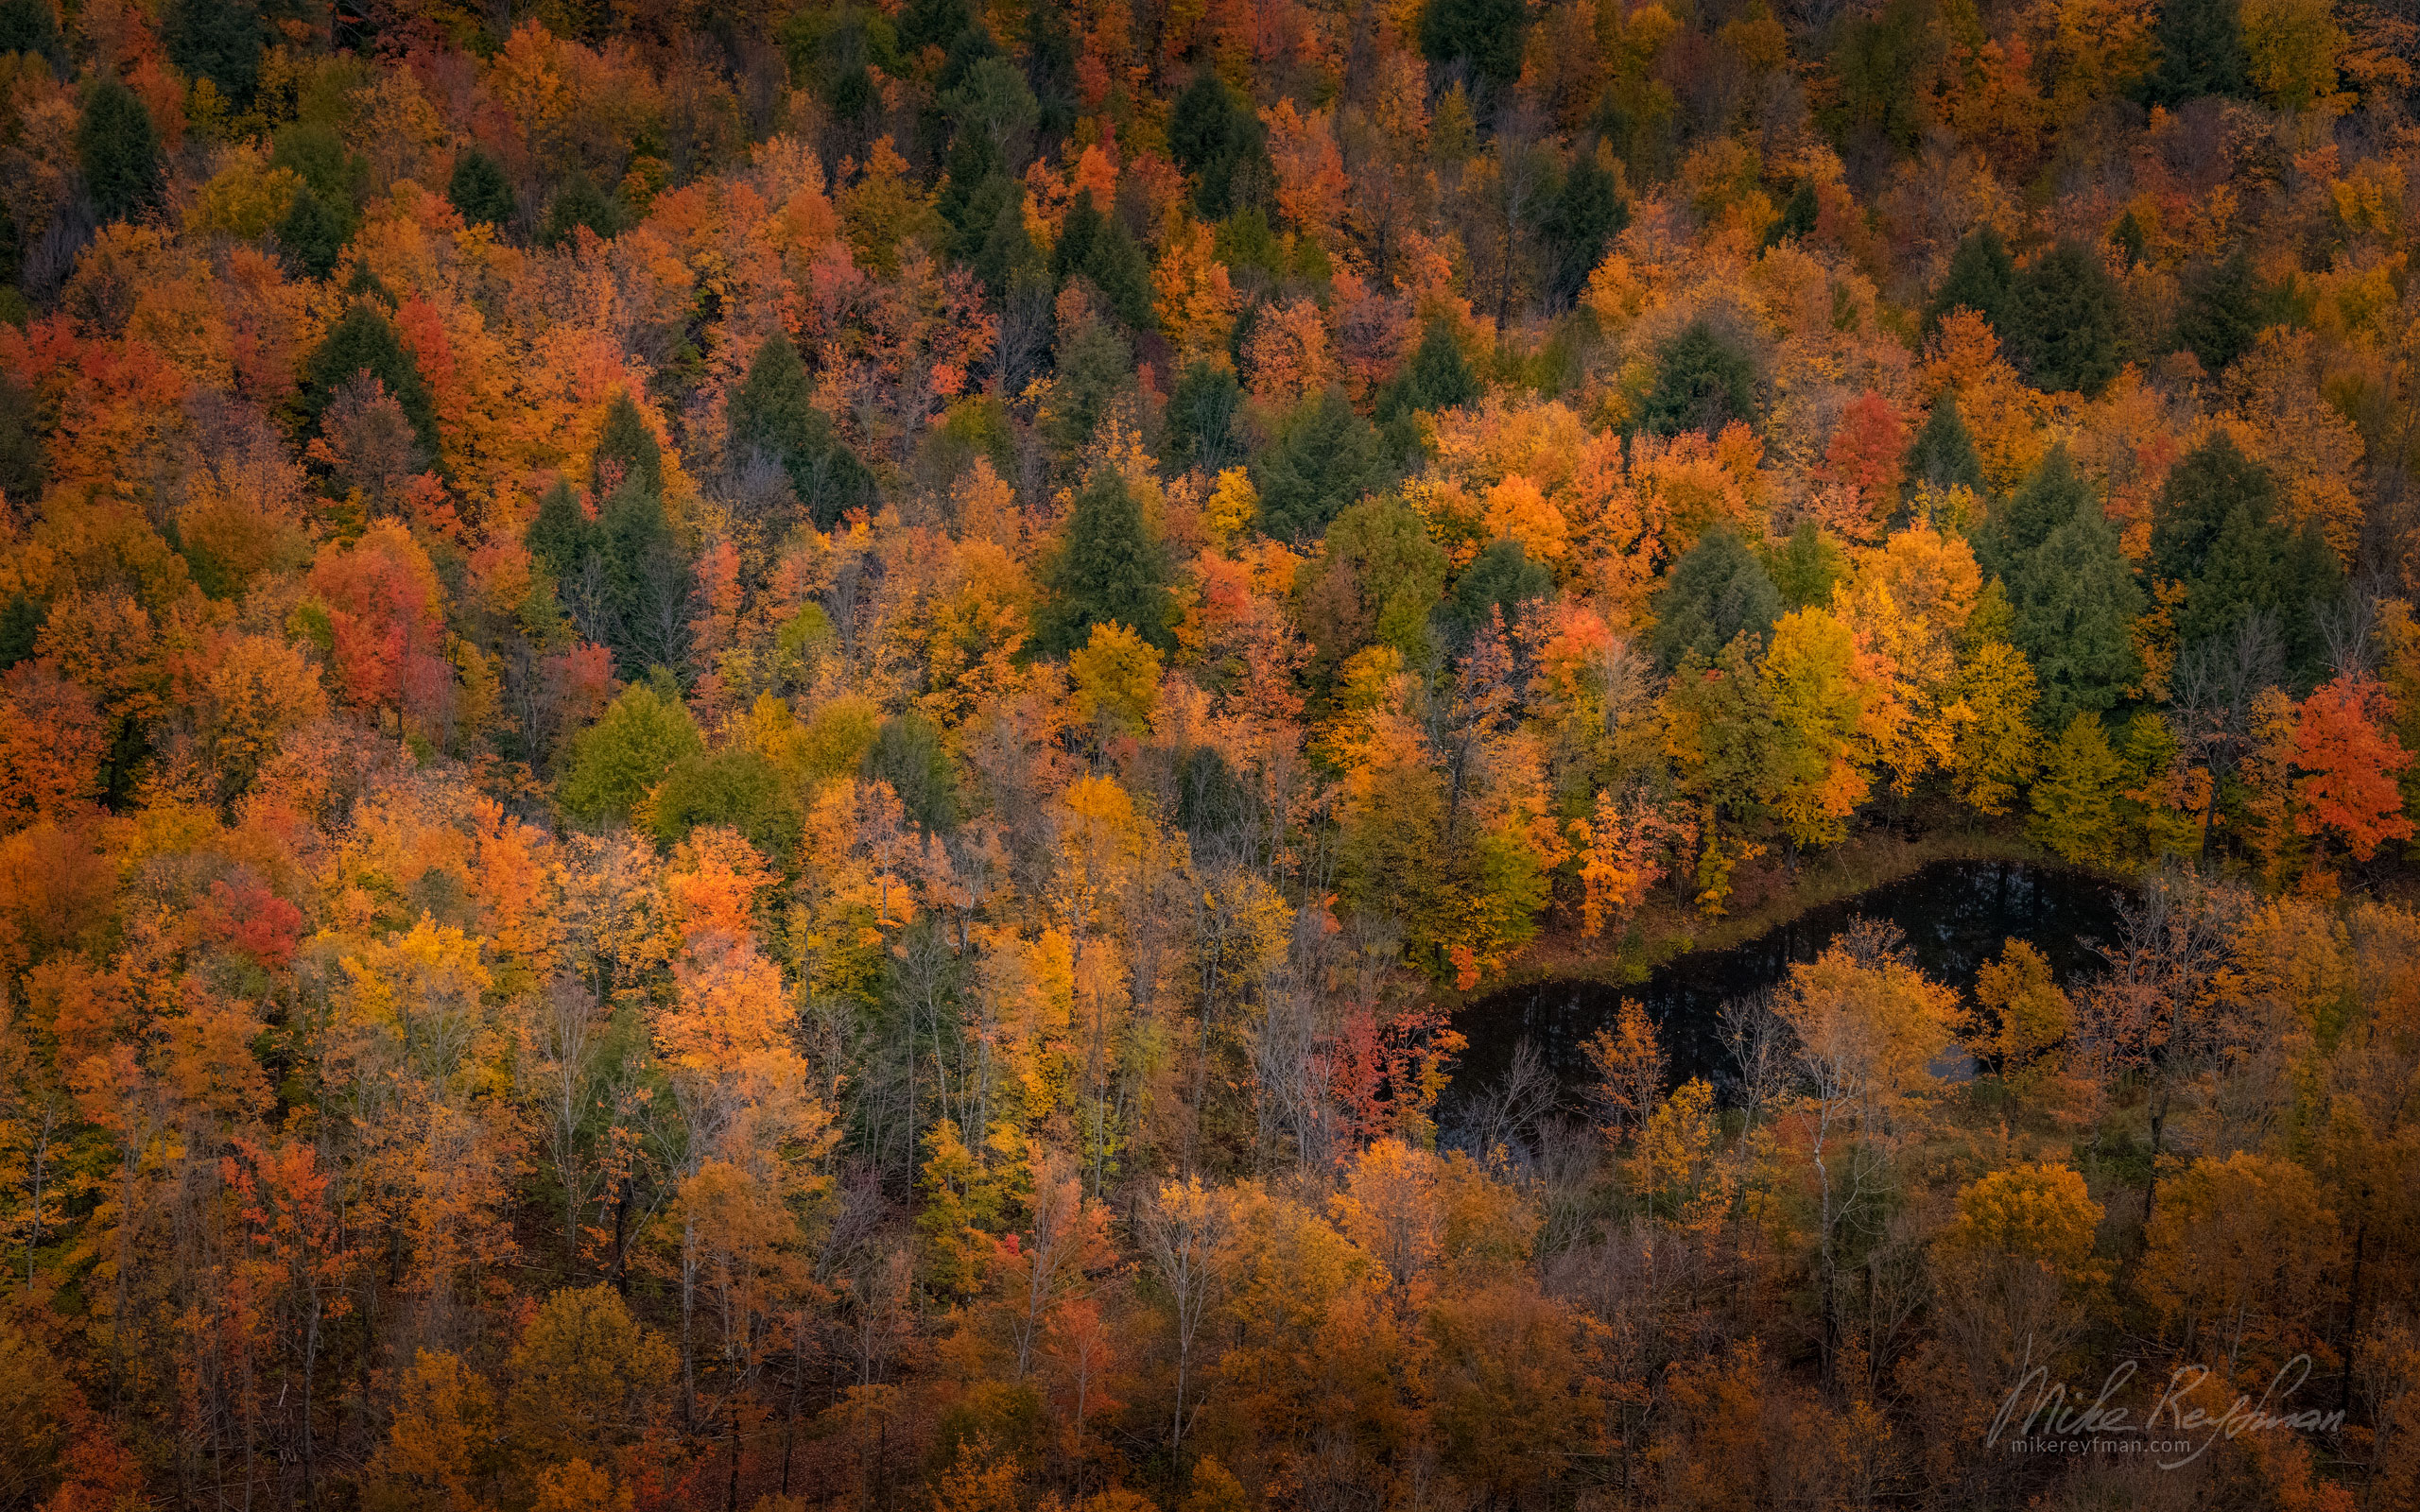 Bird-eye view from the top of Copper Peak Ski Jump. Ottava National Forest, Upper Peninsula, Michigan, USA UP-MI_094_50E3259.jpg - Michigan's Upper Peninsula - the best destination in US for fall colors. - Mike Reyfman Photography